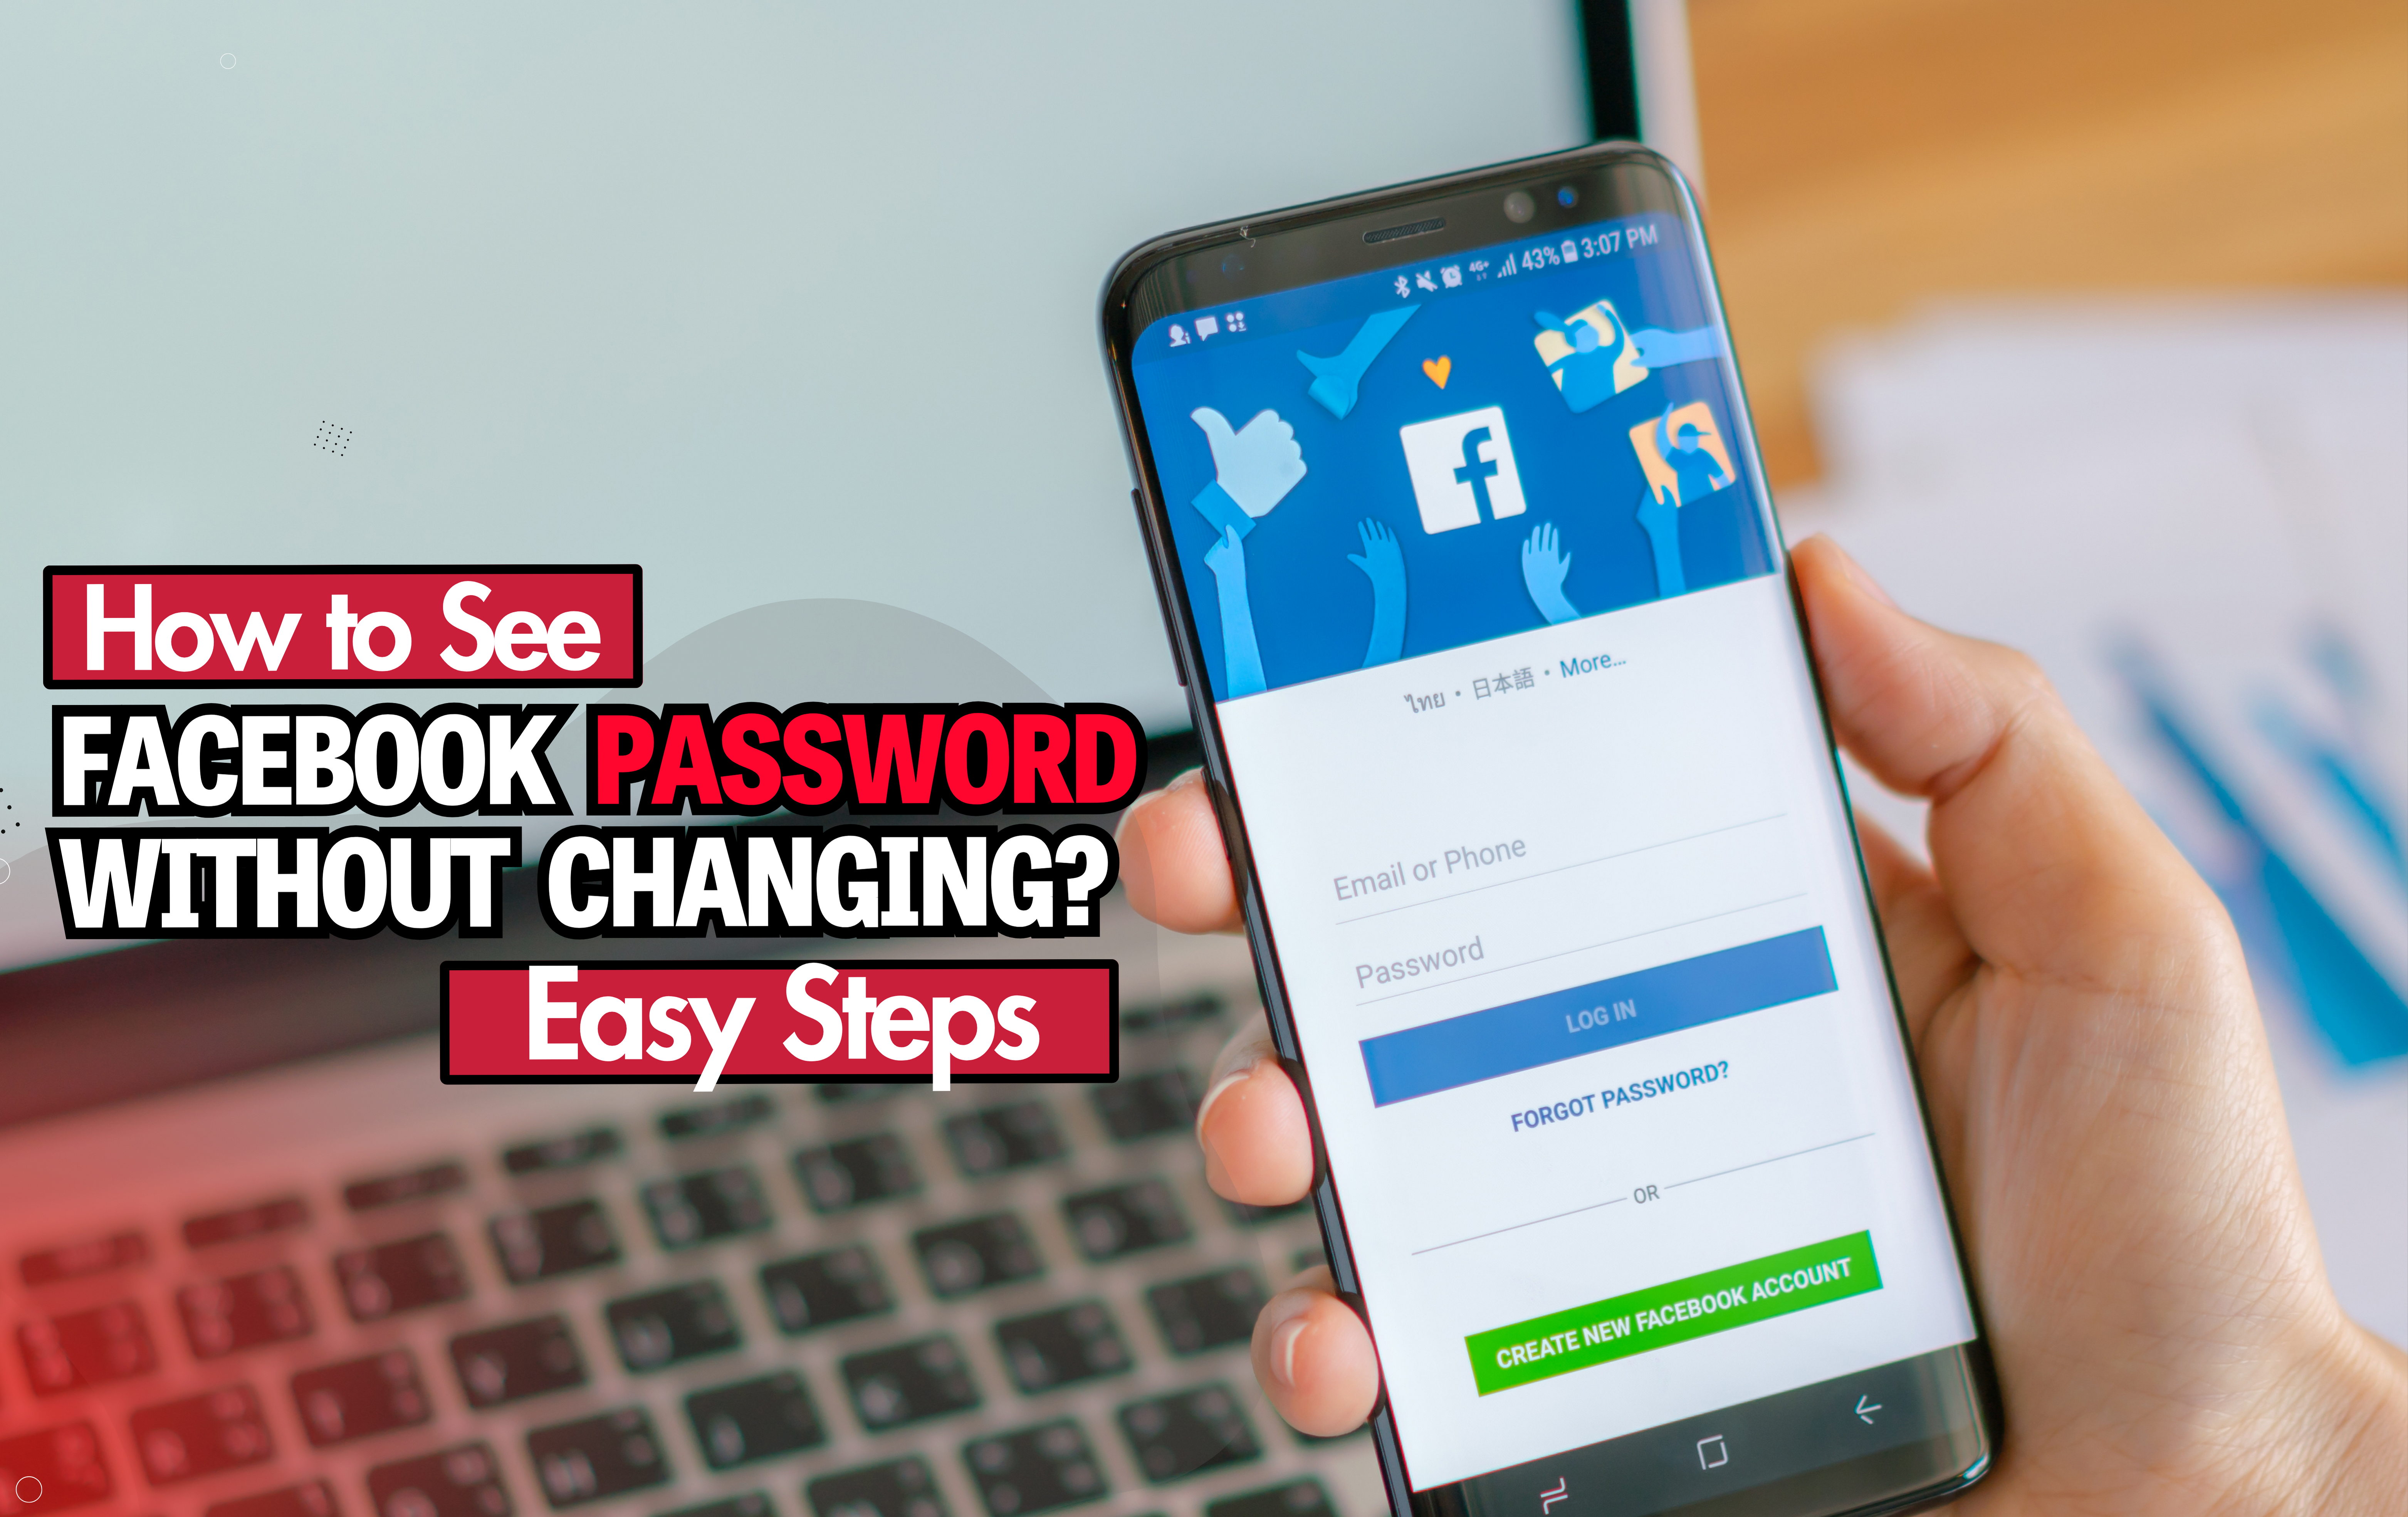 How to See Facebook Password Without Changing